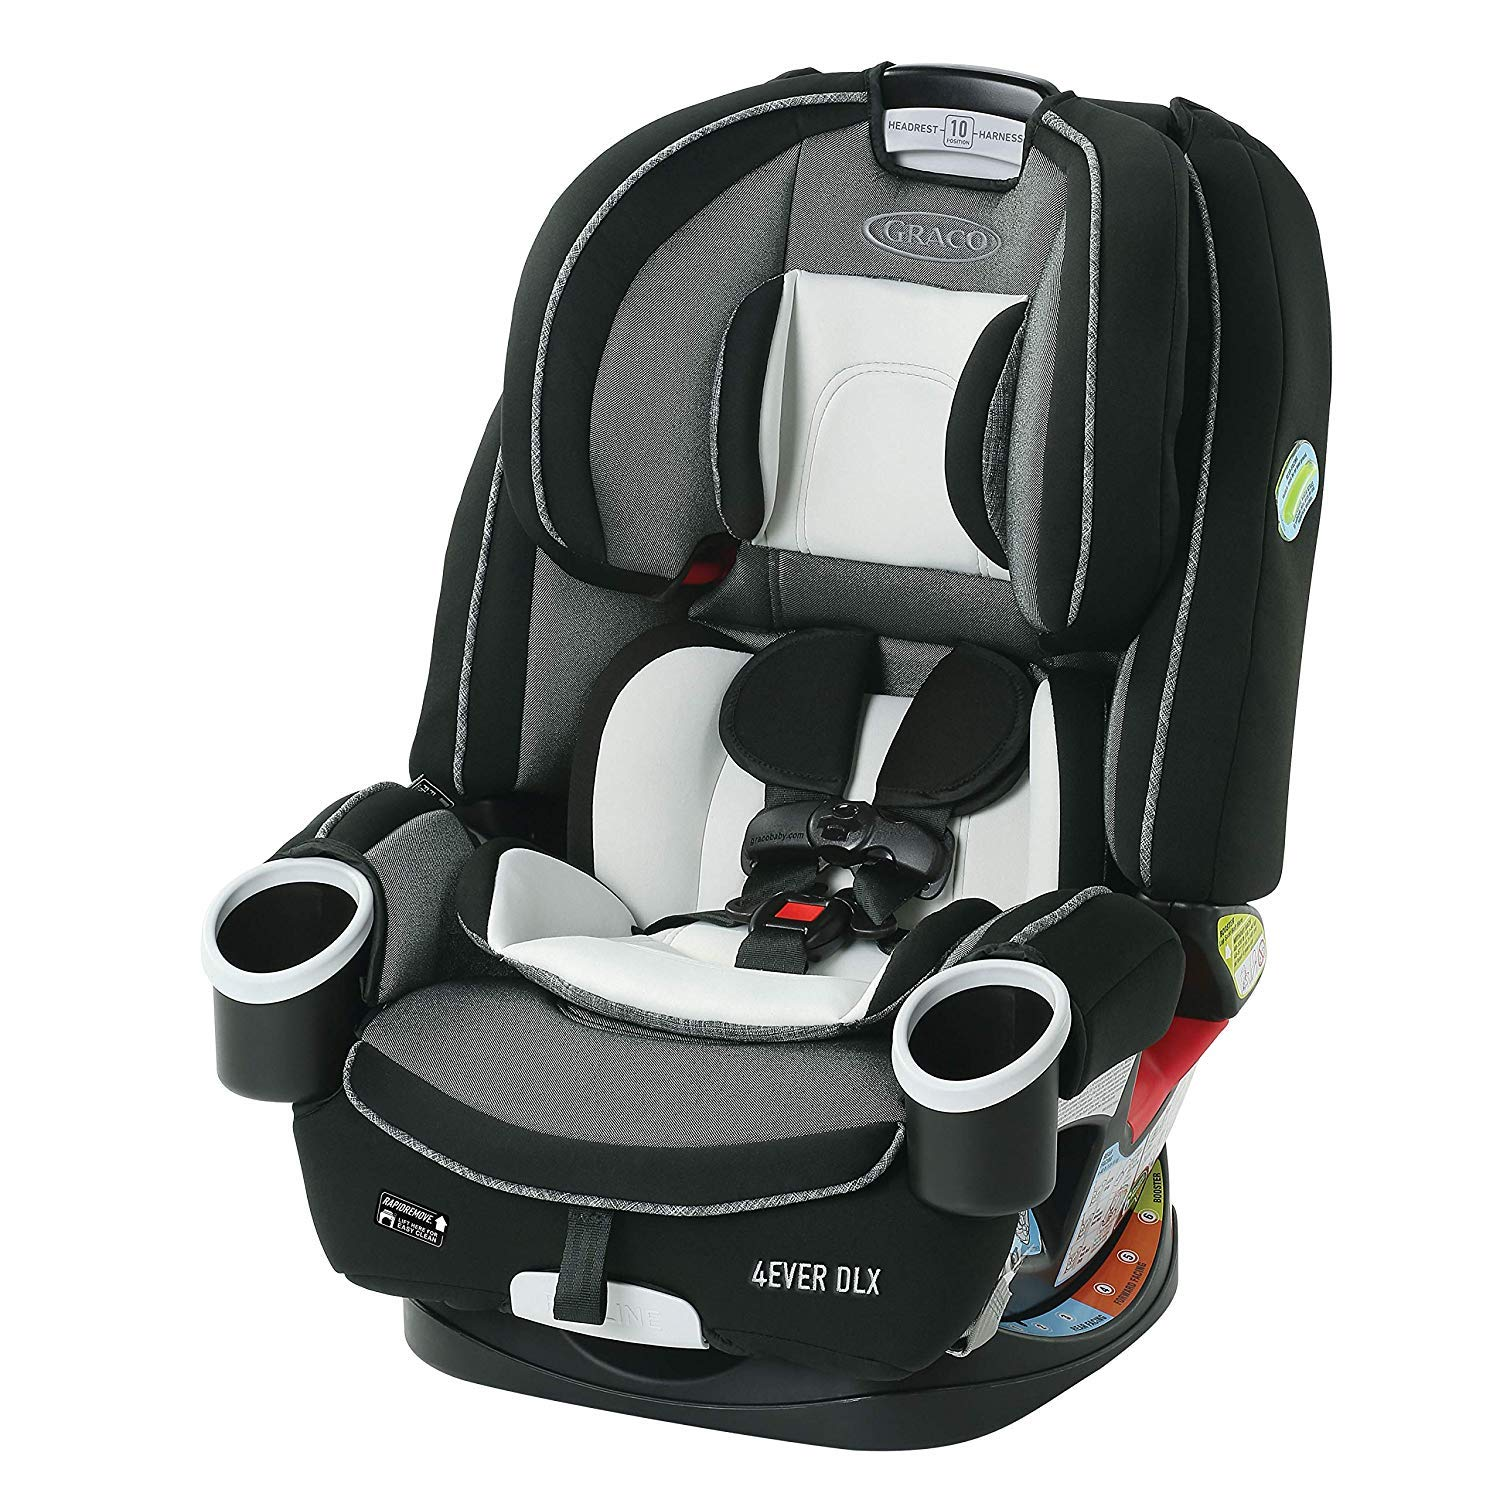 Graco 4Ever DLX 4 in 1 Car Seat, Infant to Toddler Car Seat $263.00